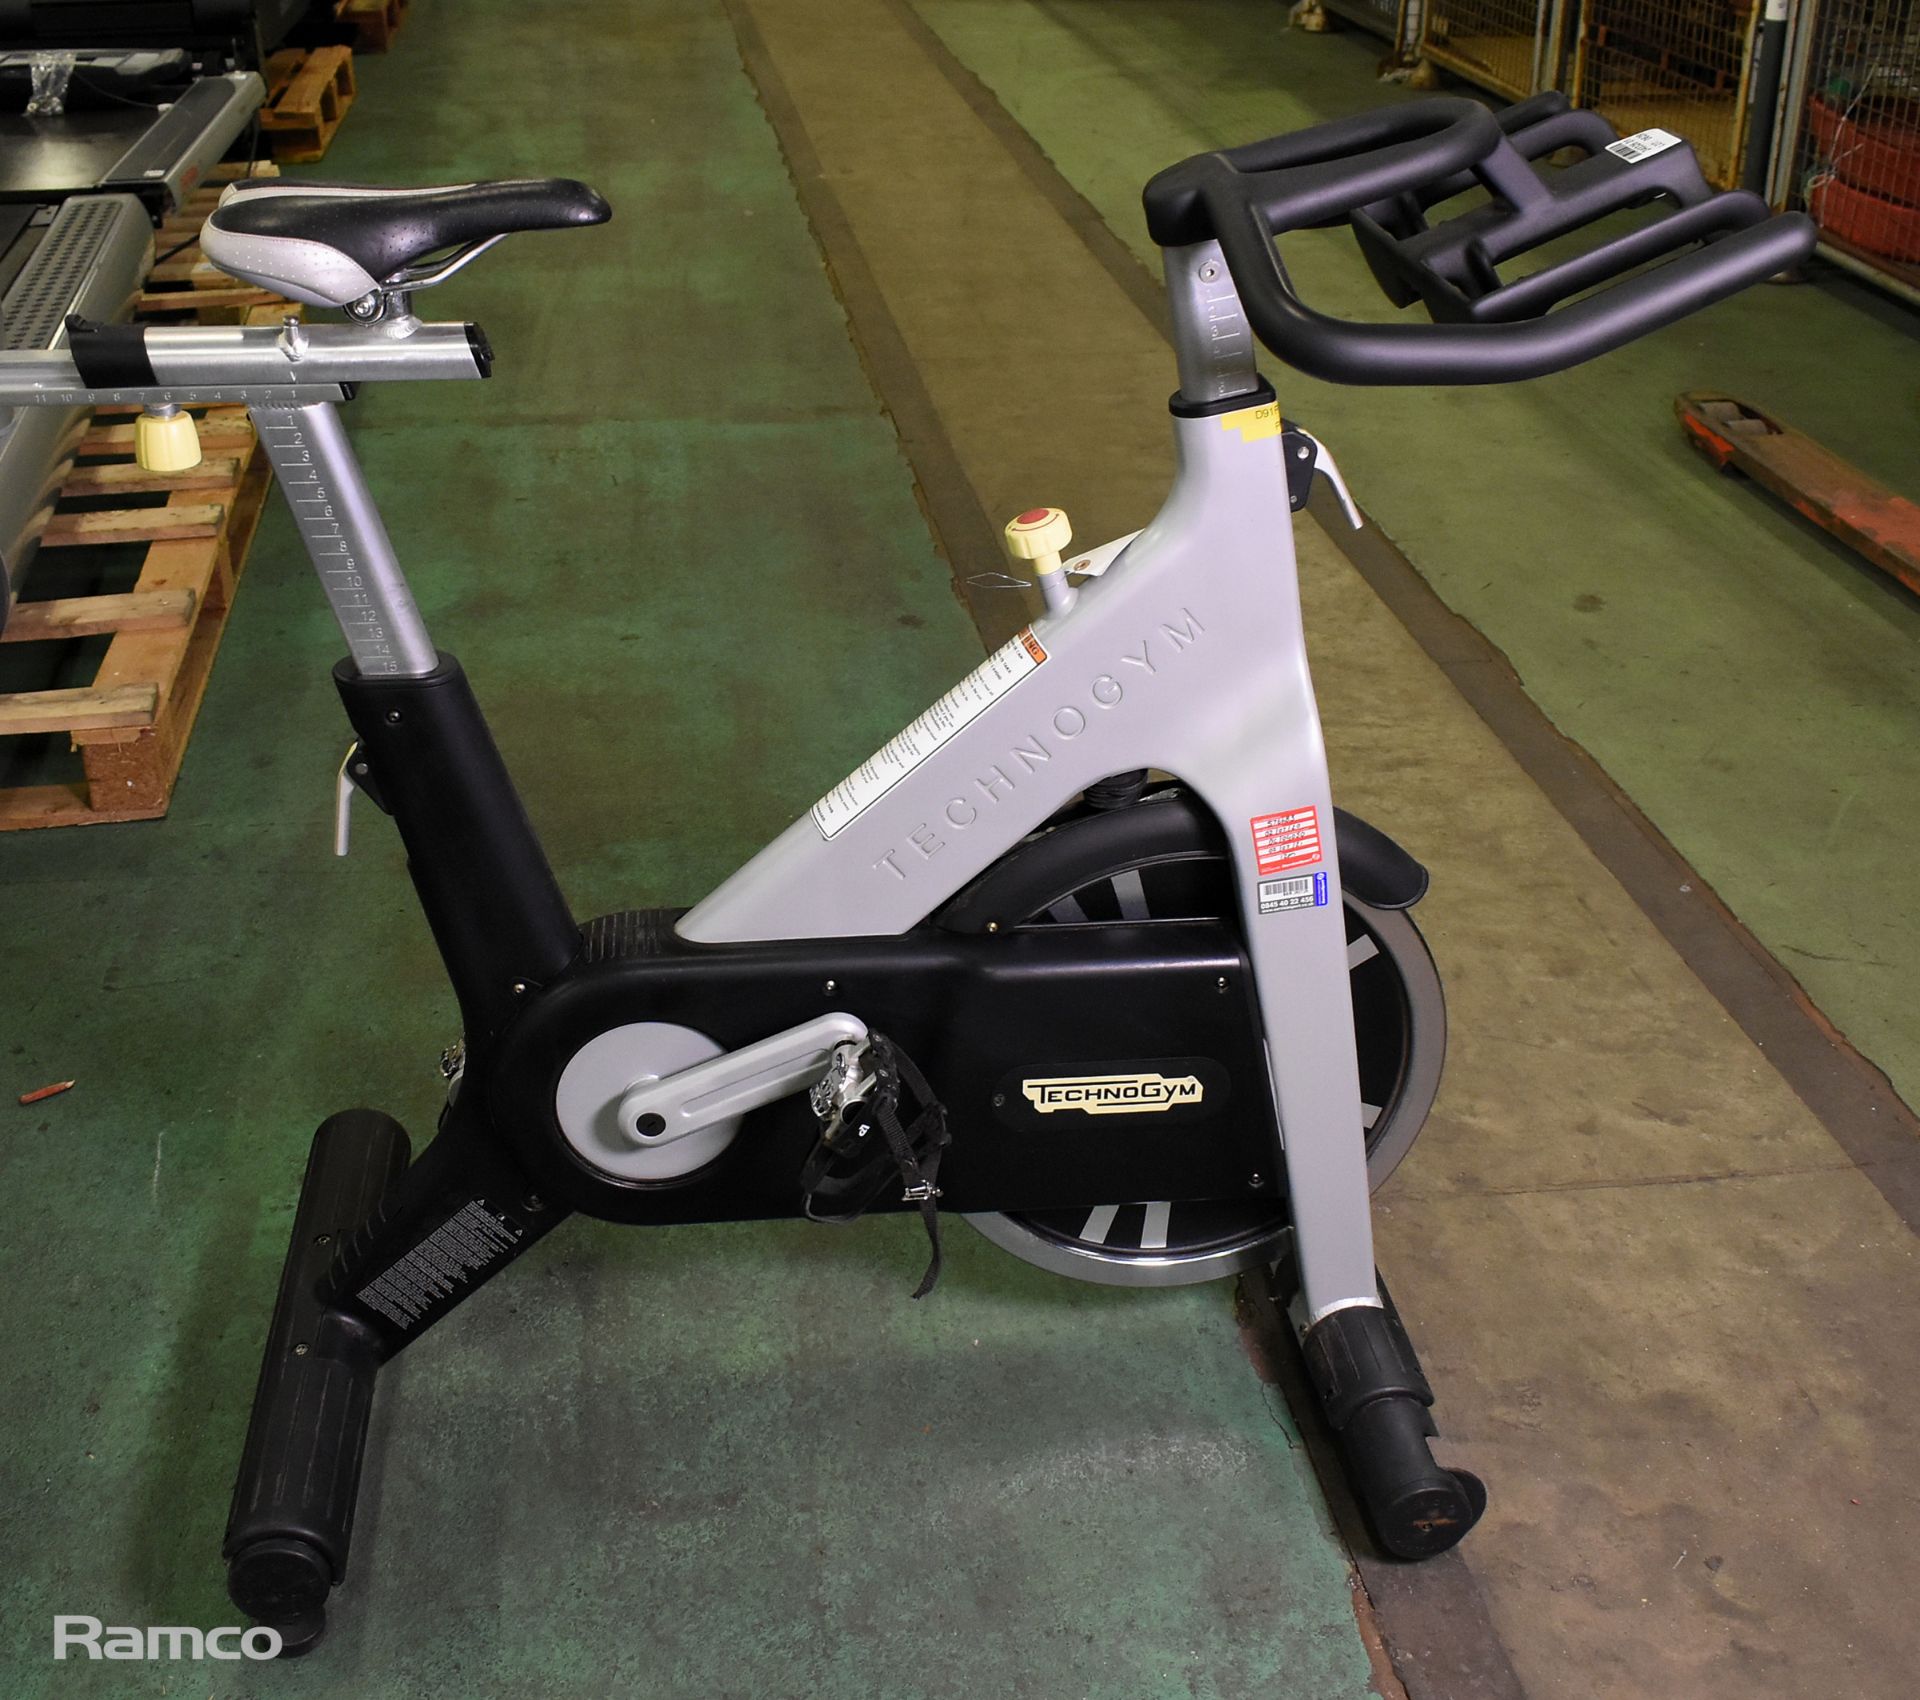 3x TechnoGym Group cycle spinning bikes - Image 3 of 23